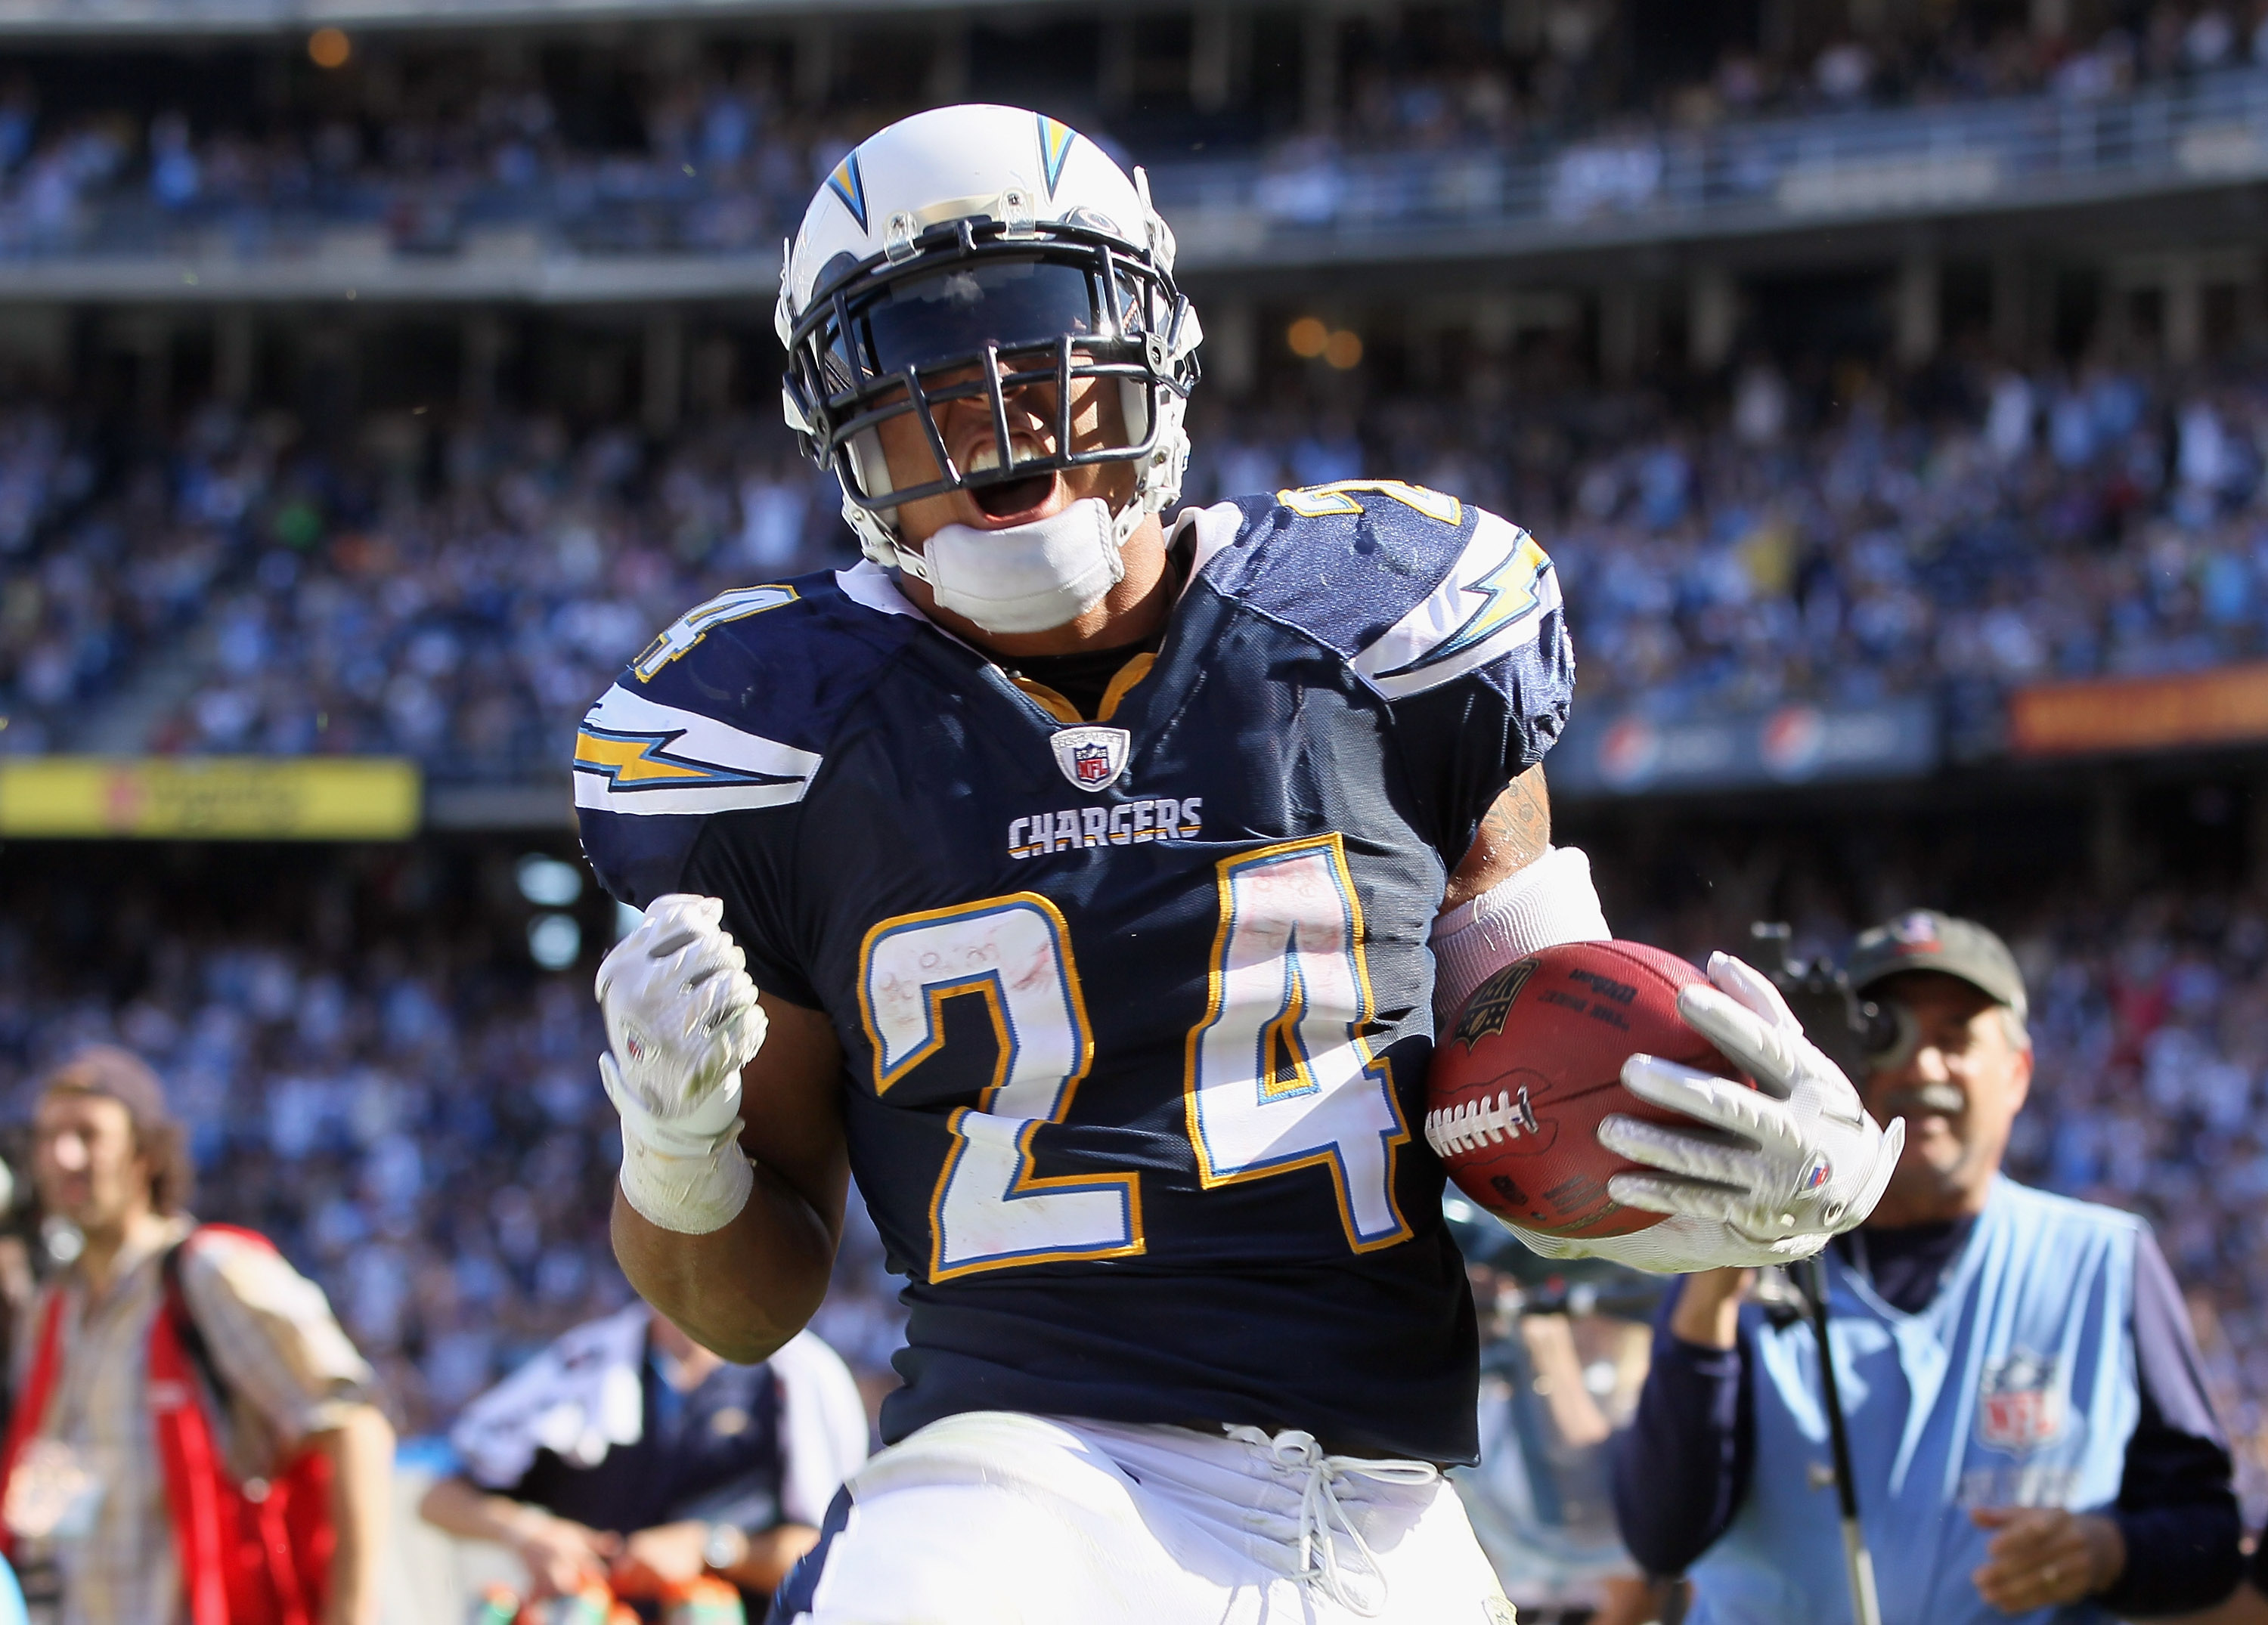 SAN DIEGO - OCTOBER 31:  Running back Ryan Mathews #24 of the San Diego Chargers celebrates after scoring a touchdown in the second quarter against the Tennessee Titans at Qualcomm Stadium on October 31, 2010 in San Diego, California.  (Photo by Jeff Gros